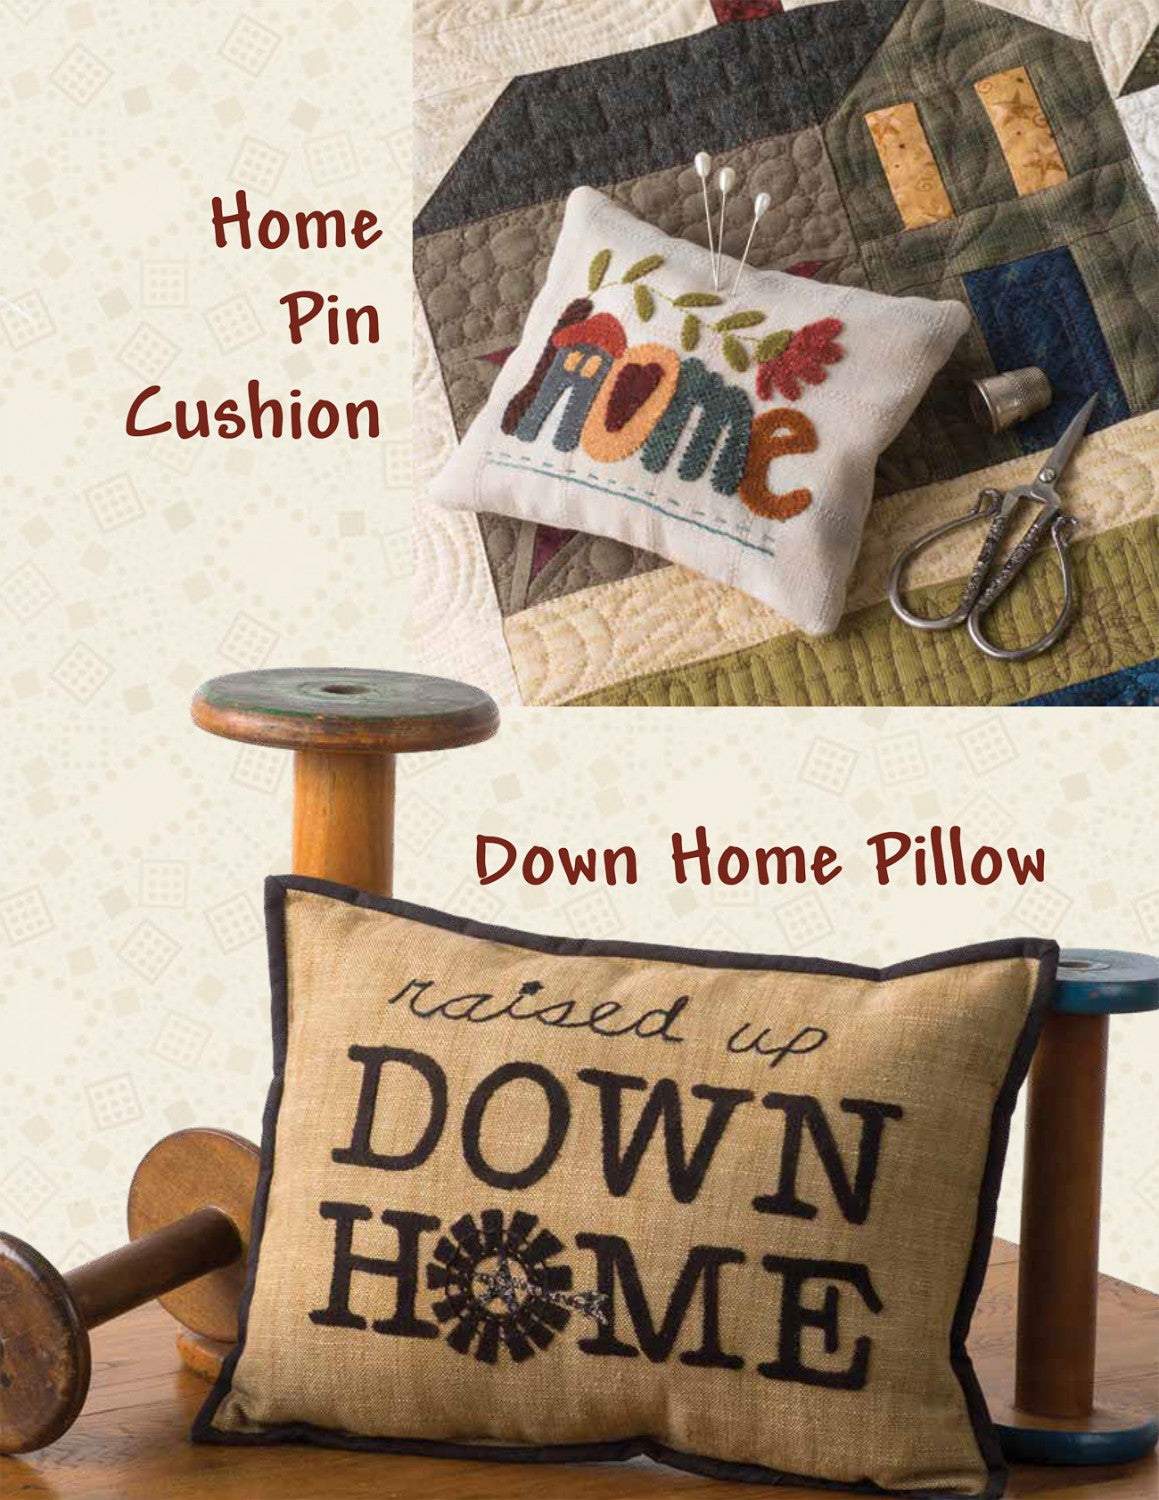 Down Home Quilts Quilt Pattern Book by Janet Nesbitt of One Sister Designs